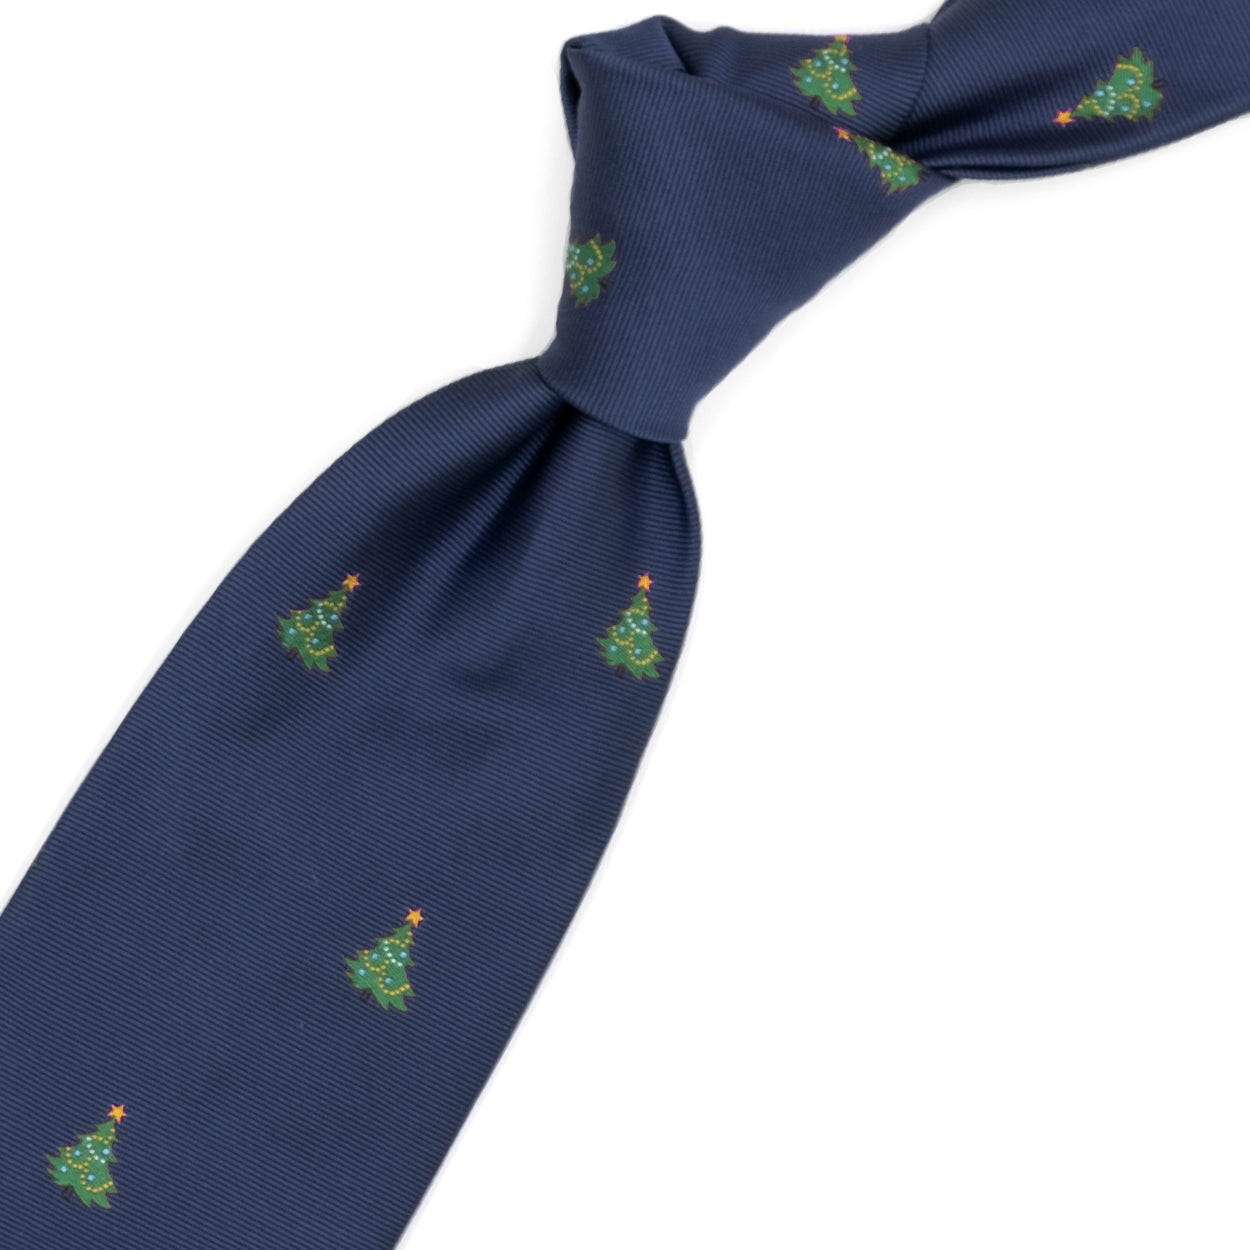 Blue tie with Christmas trees